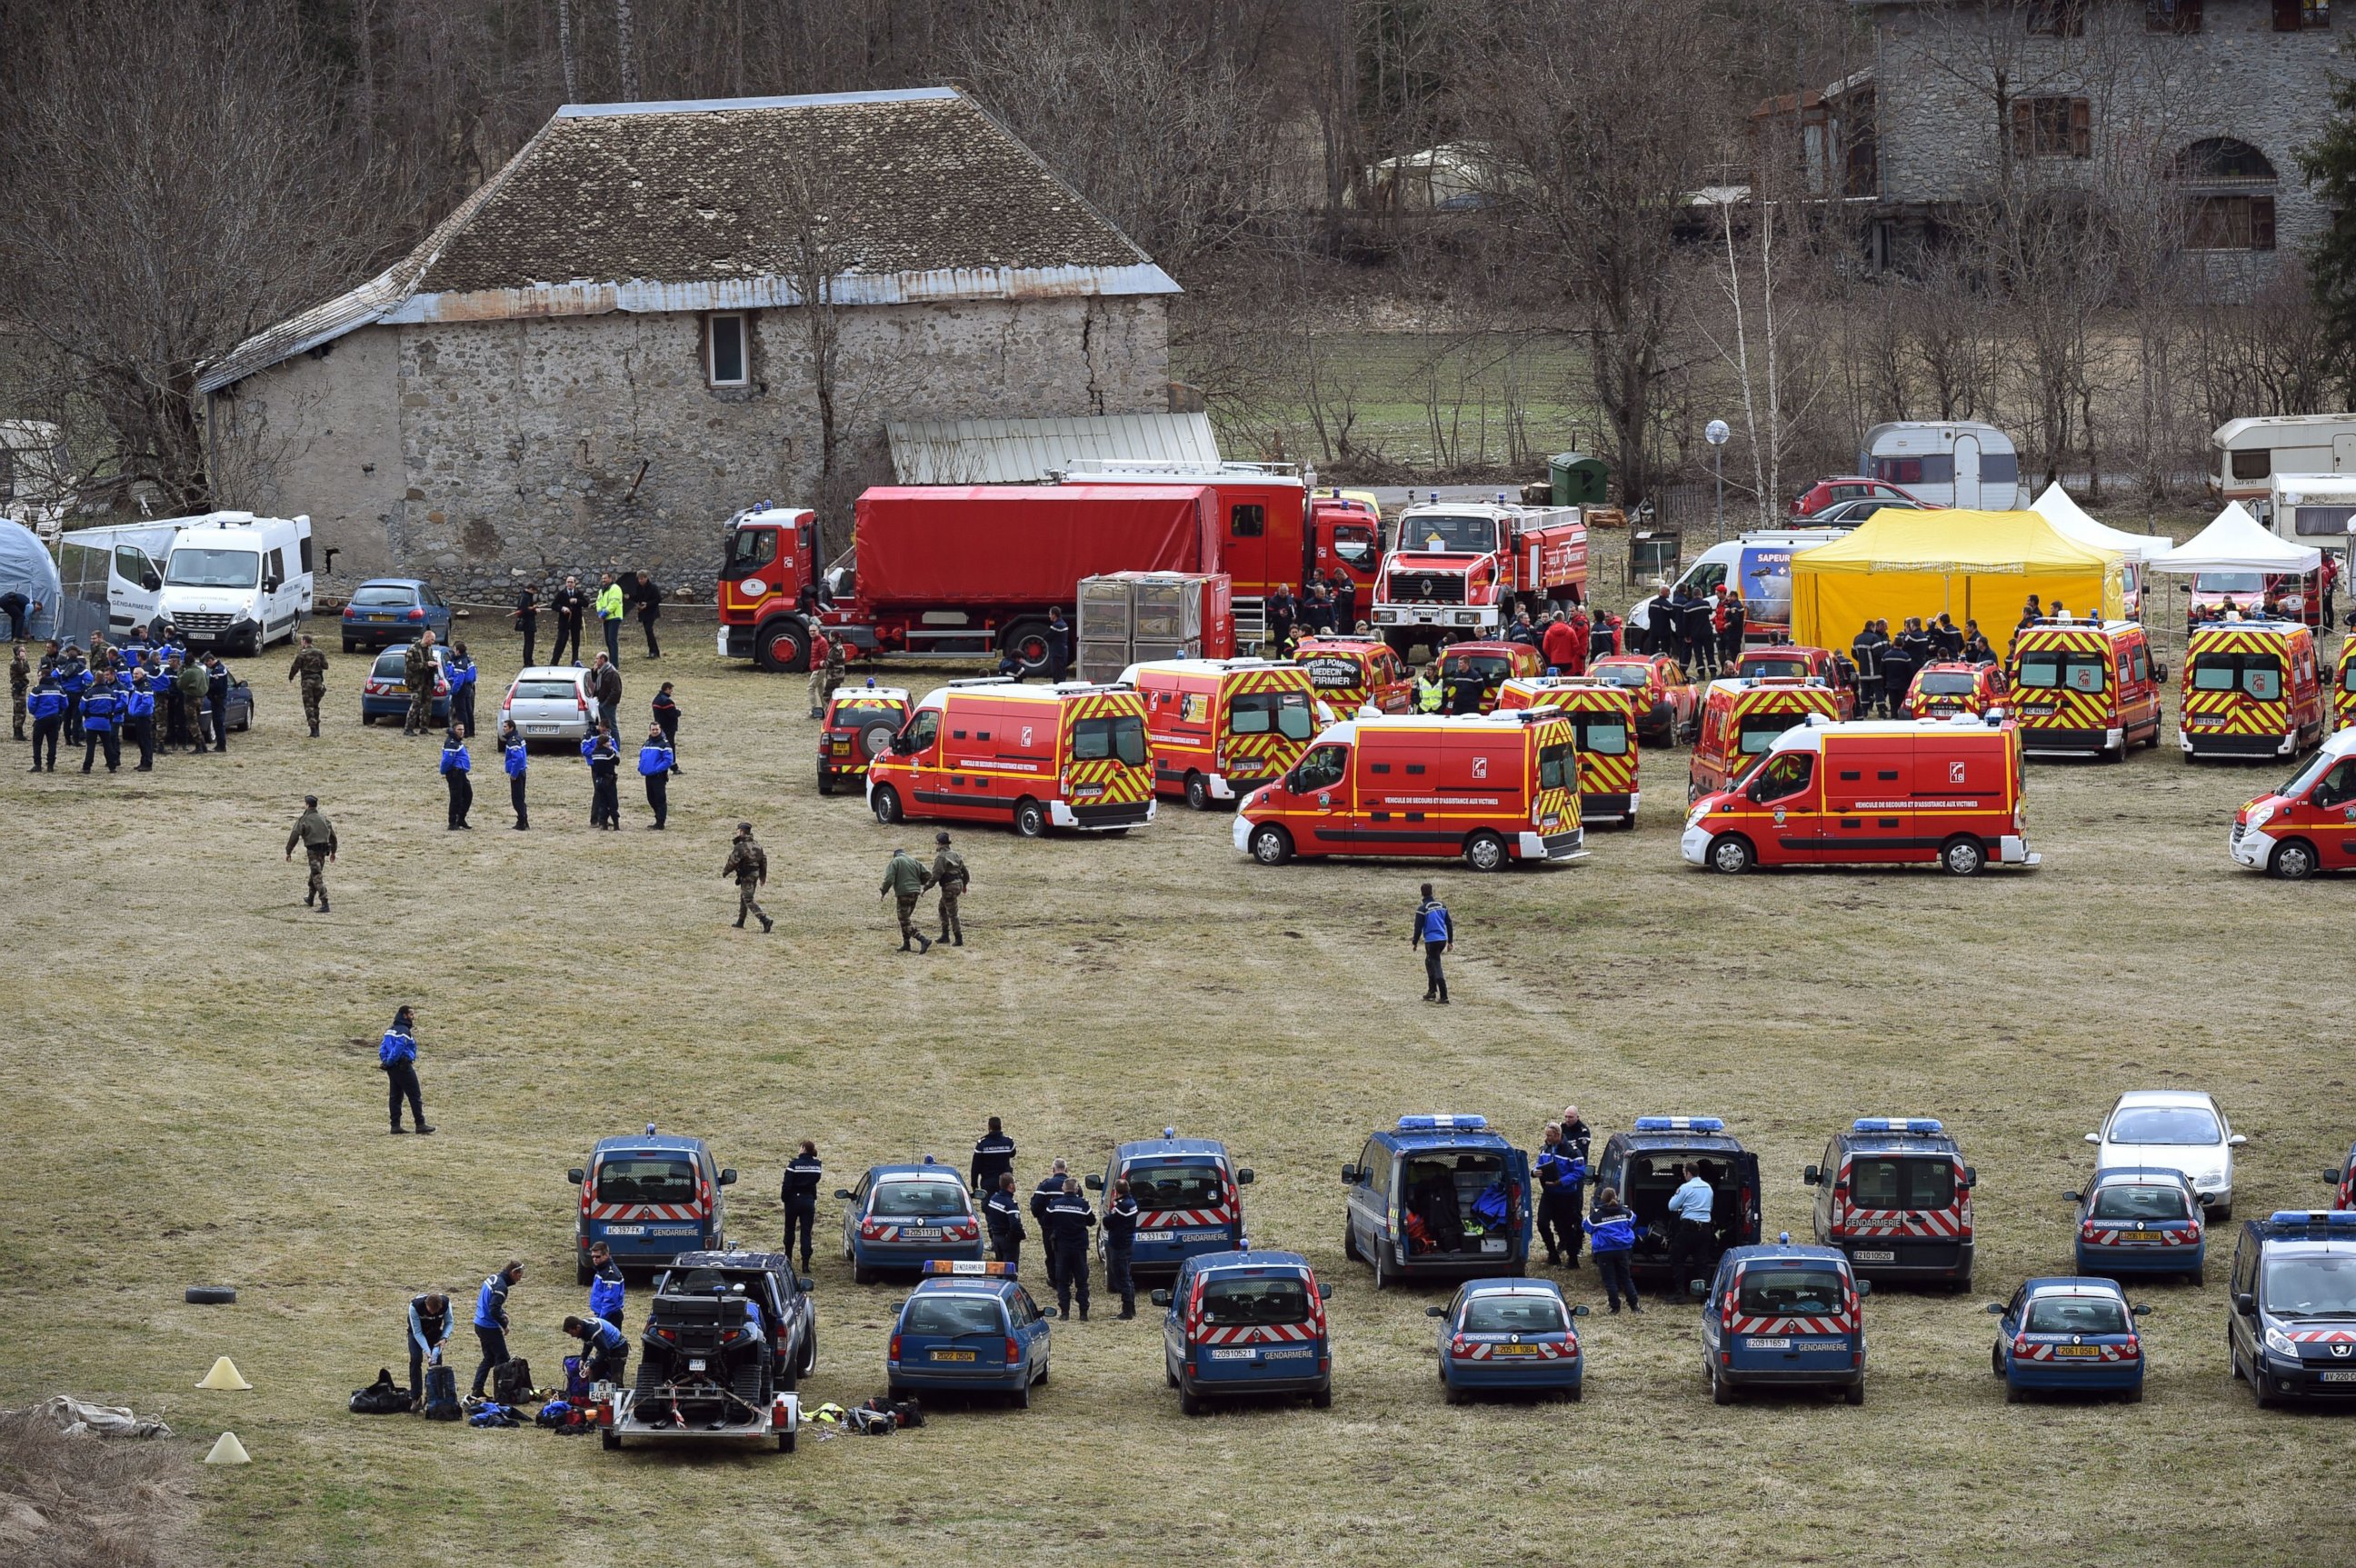 PHOTO:French emergency services workers and members of the French gendarmerie gather in Seyne, near the site where a Germanwings Airbus A320 crashed in the French Alps, March 24, 2015.